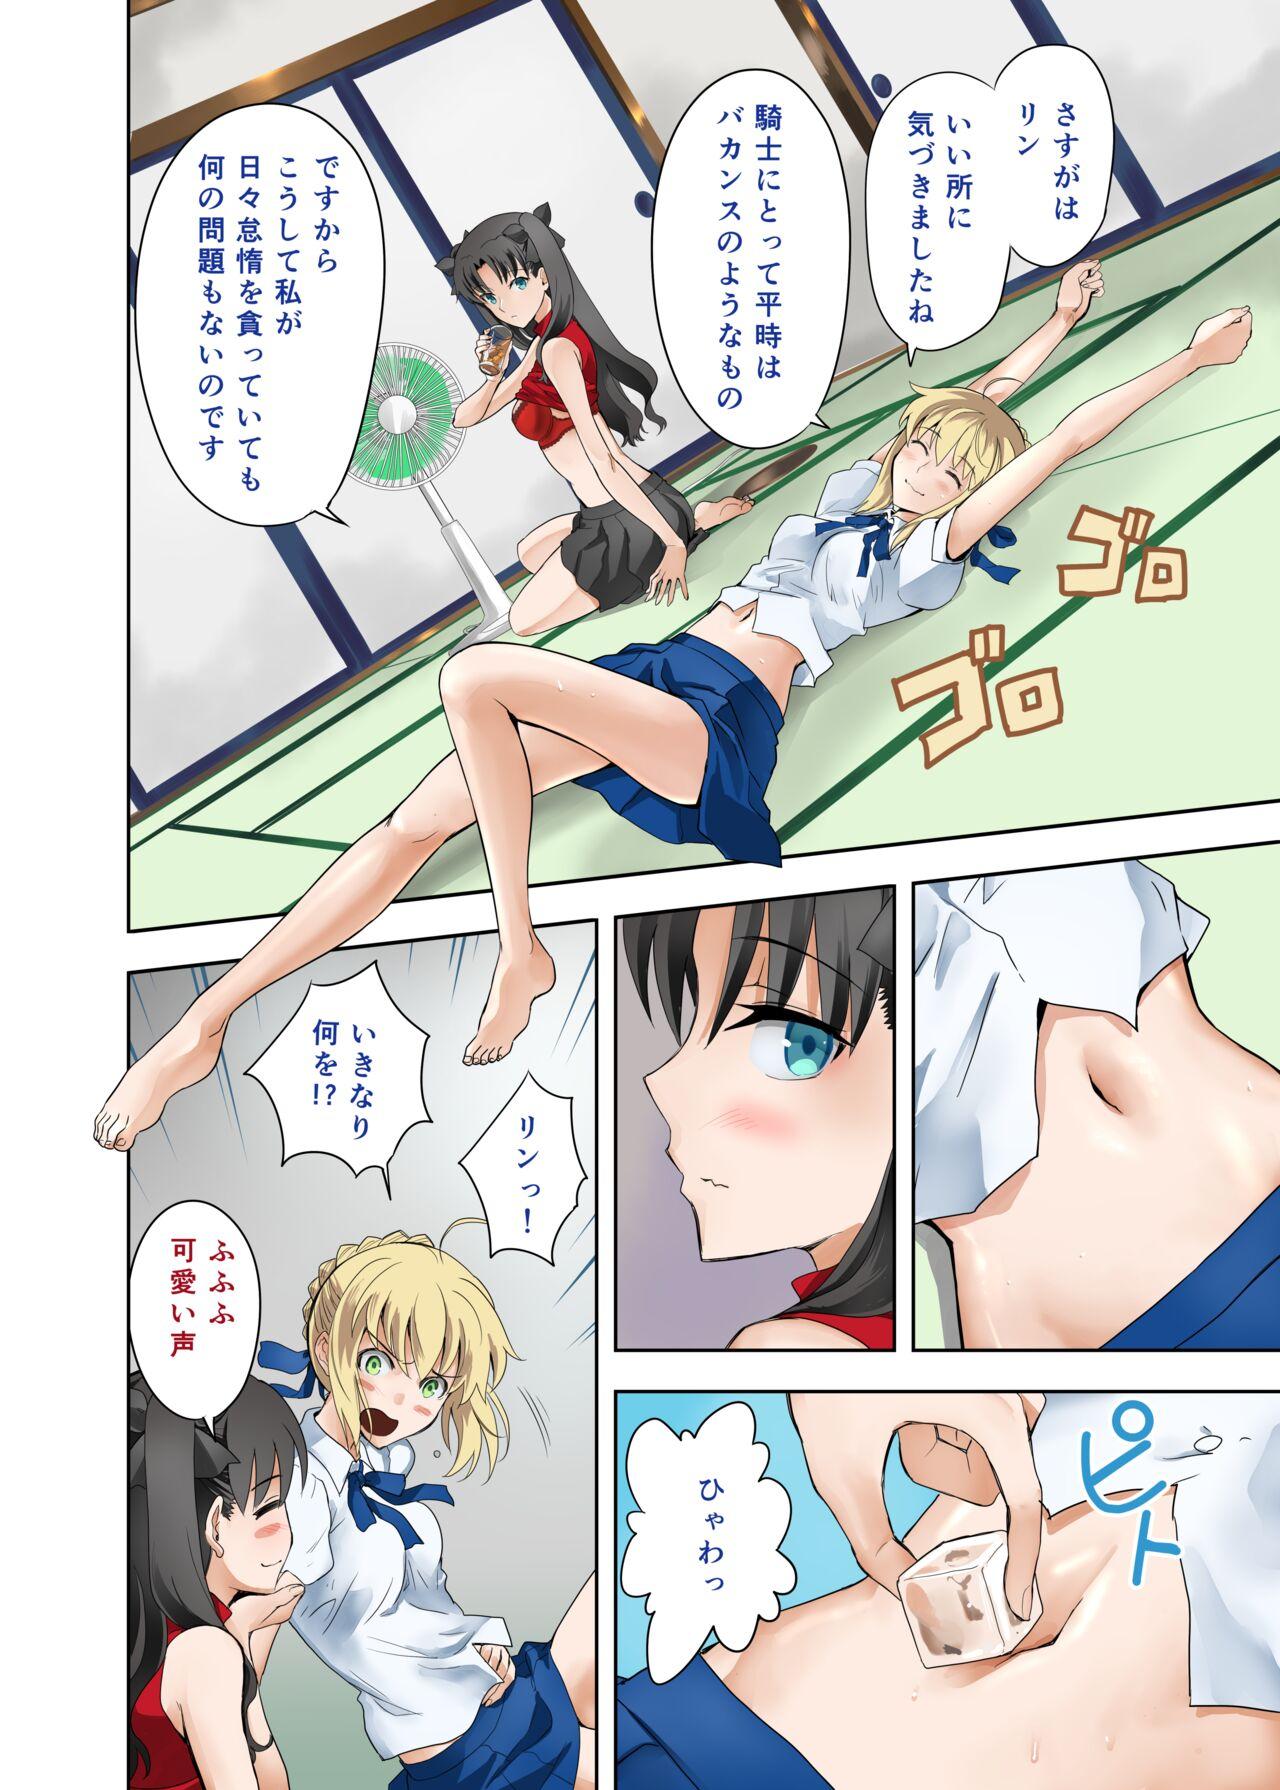 Emo Gay Saber's summer vacation - Fate stay night 18yo - Page 4